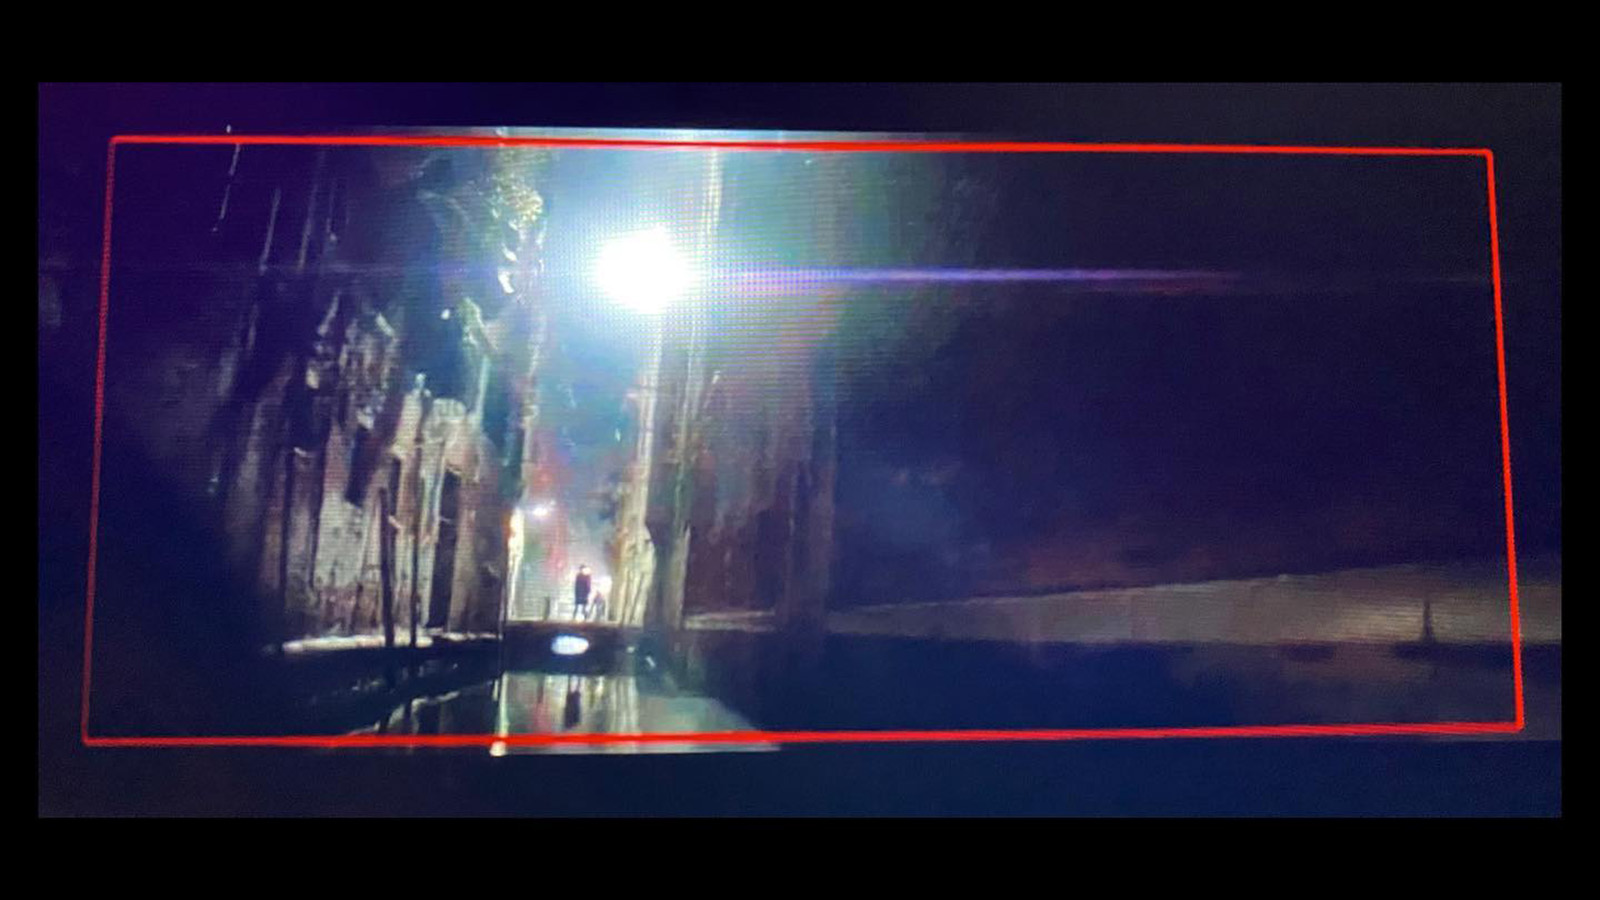 Monitor view of Venice at night for Dead Reckoning